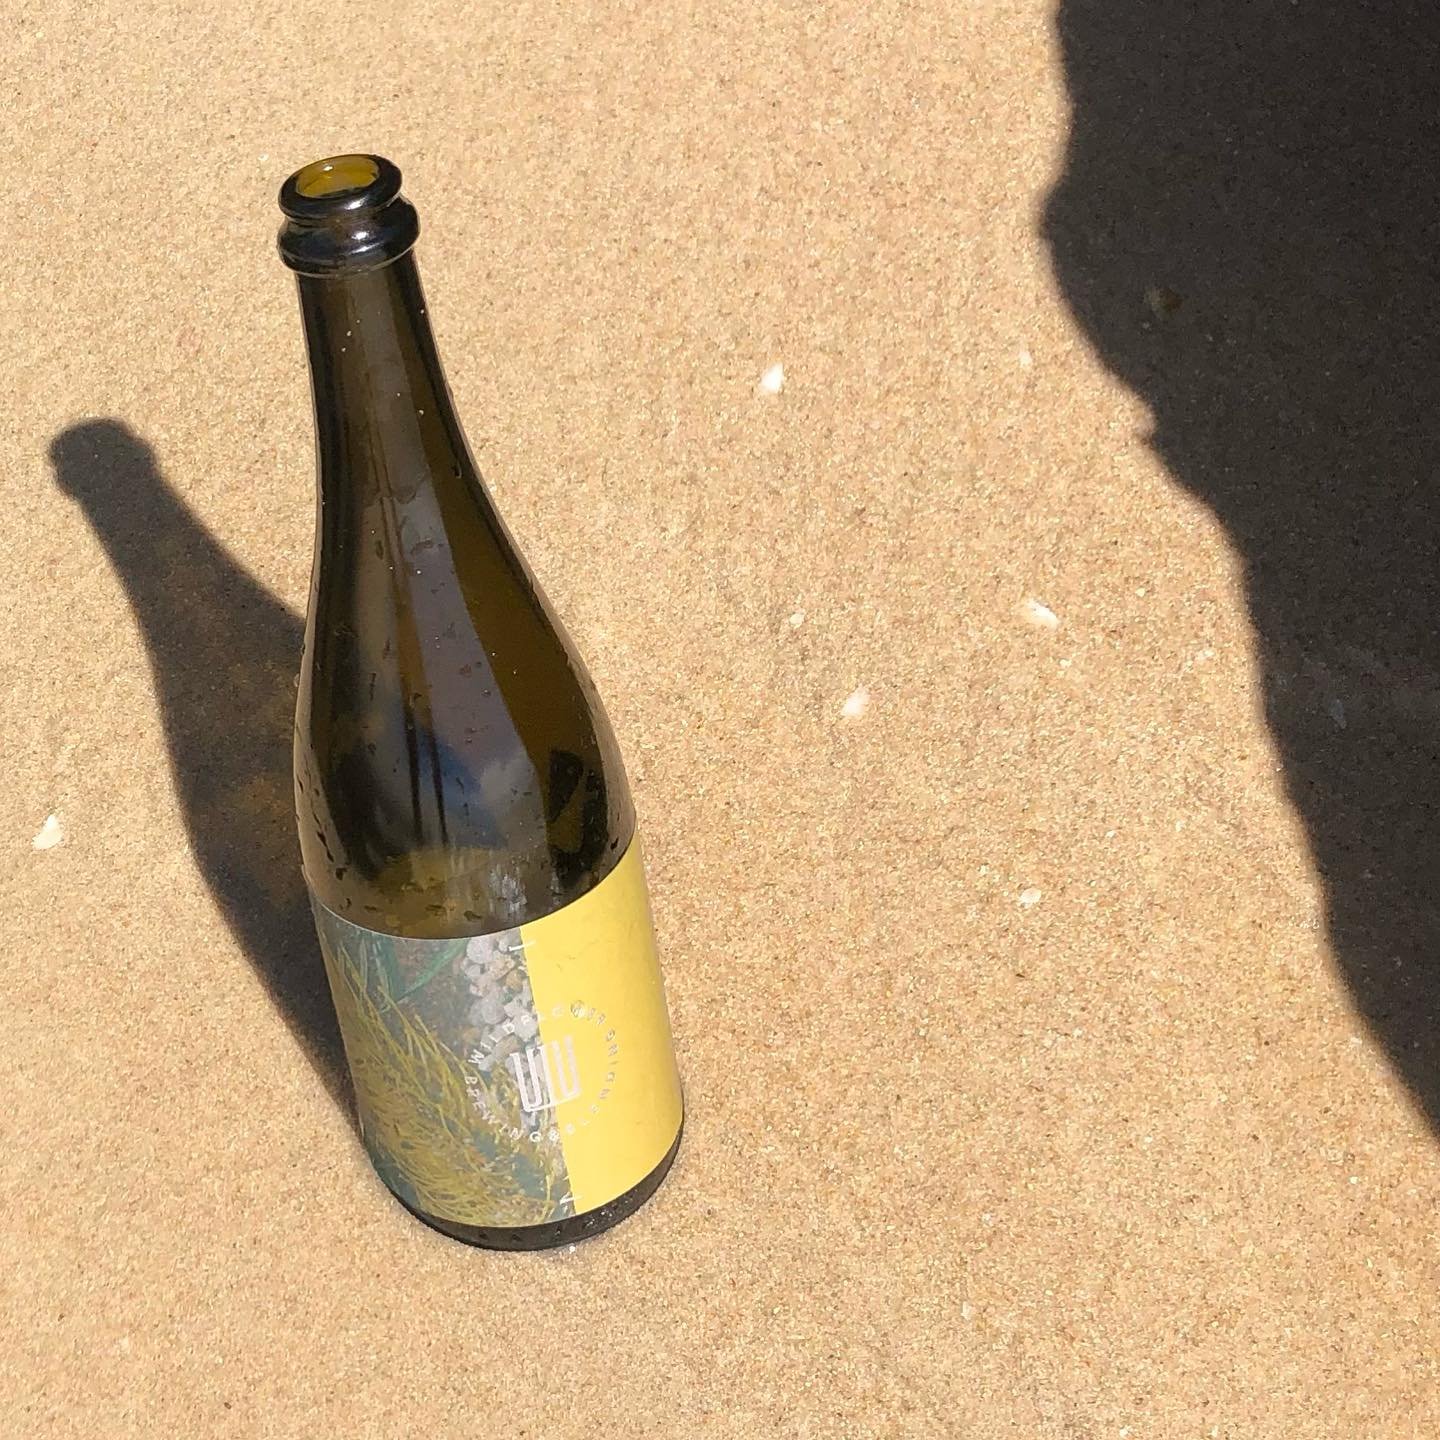 It&rsquo;s feeling like a &ldquo;Good as Gold&rdquo; Thursday and with rising mercuries today in Perth we couldn&rsquo;t imagine a better way to end the afternoon than a cold bottle of @wildflowerbeer down by the water!